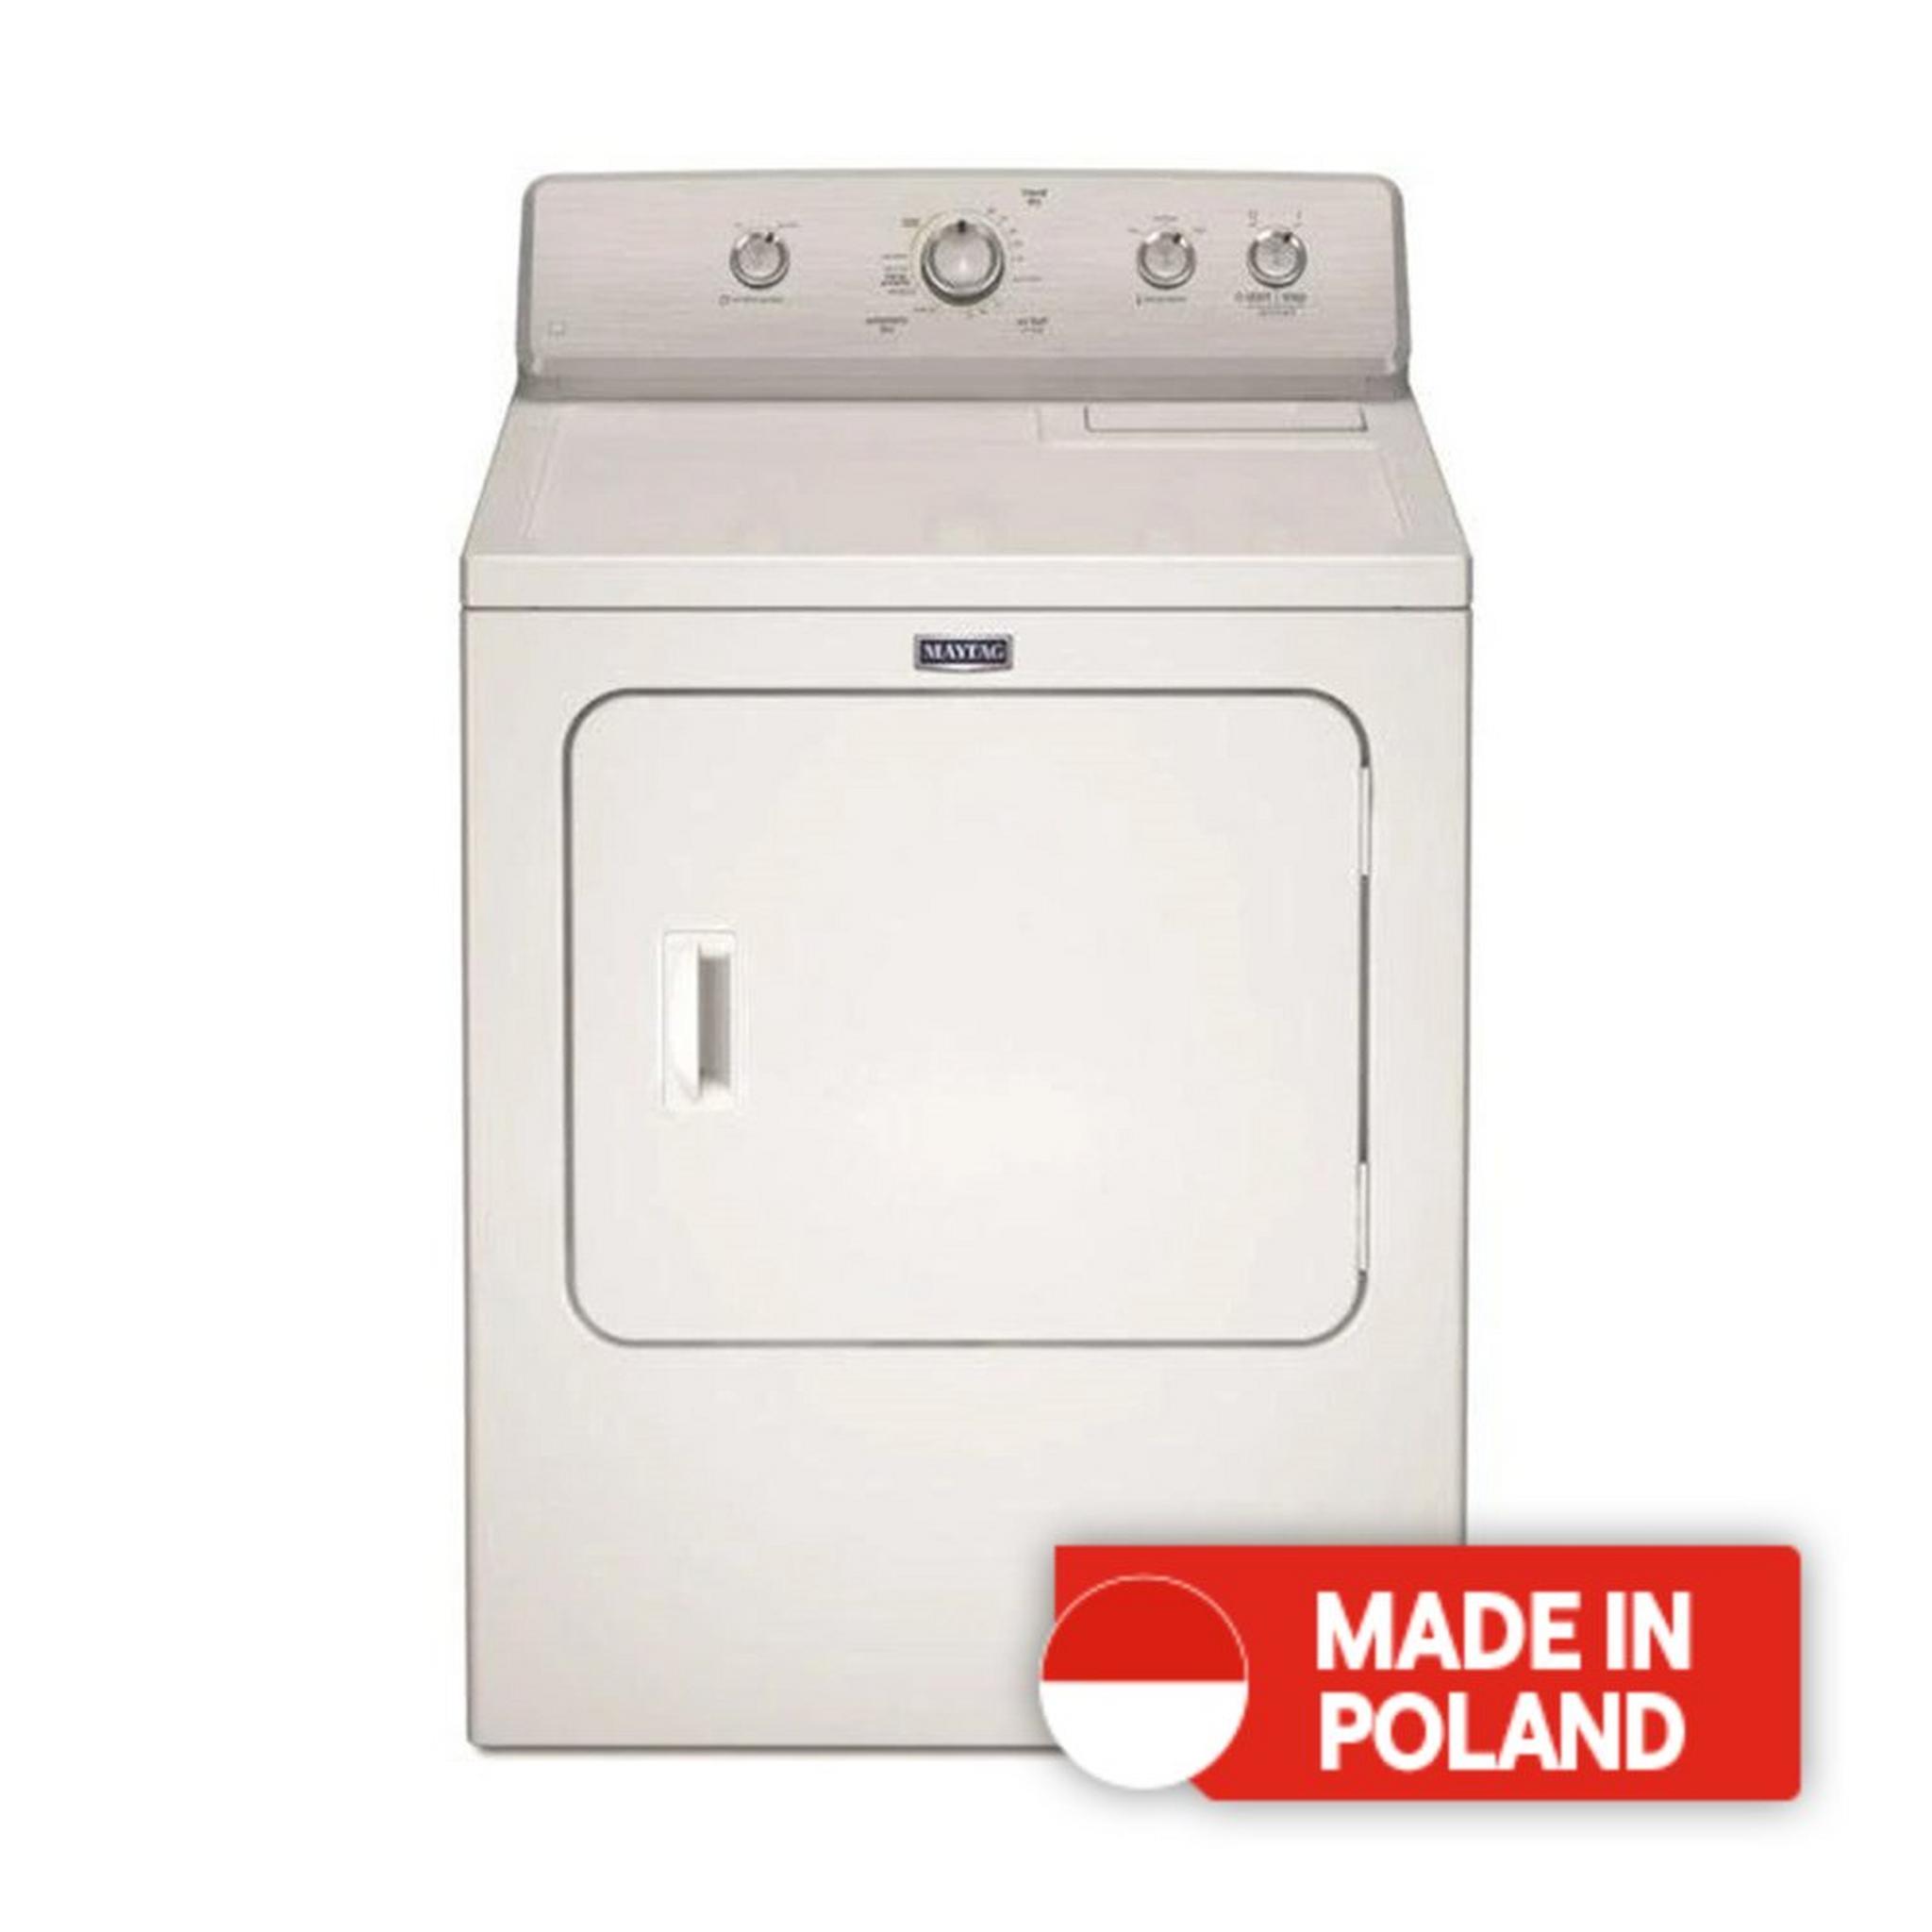 Maytag 15KG Vented Tumble Dryer - White 3LMEDC415FW